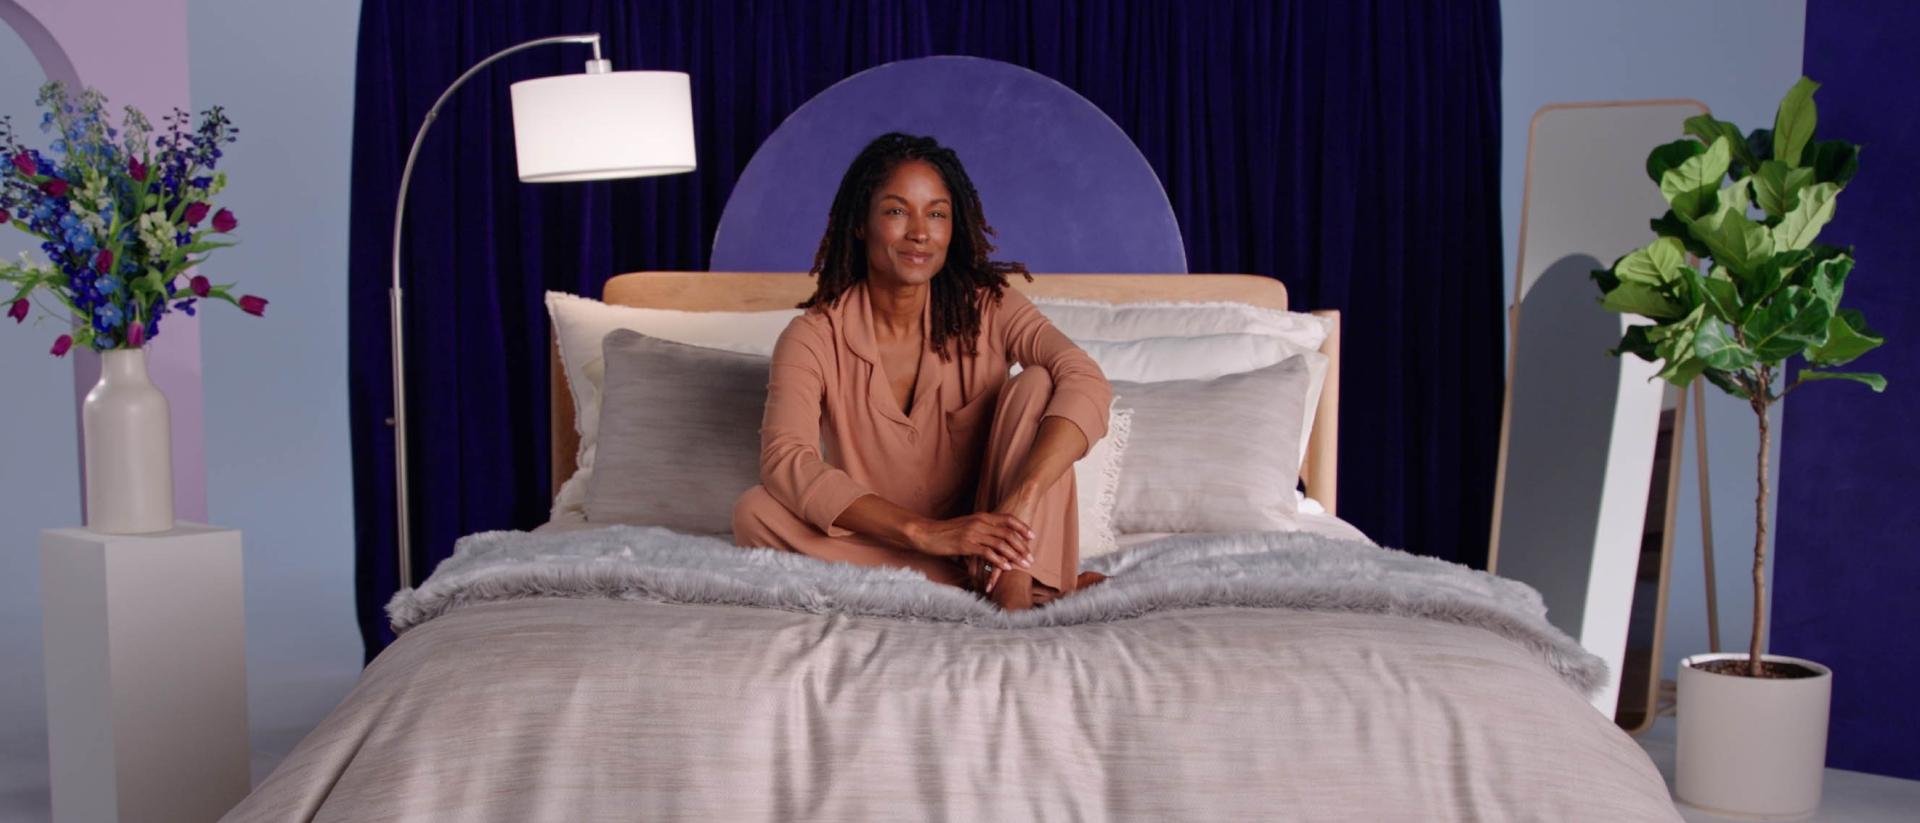 Woman in tan pajamas sits on a bed with gray bedding in a bedroom with blue walls and plants.